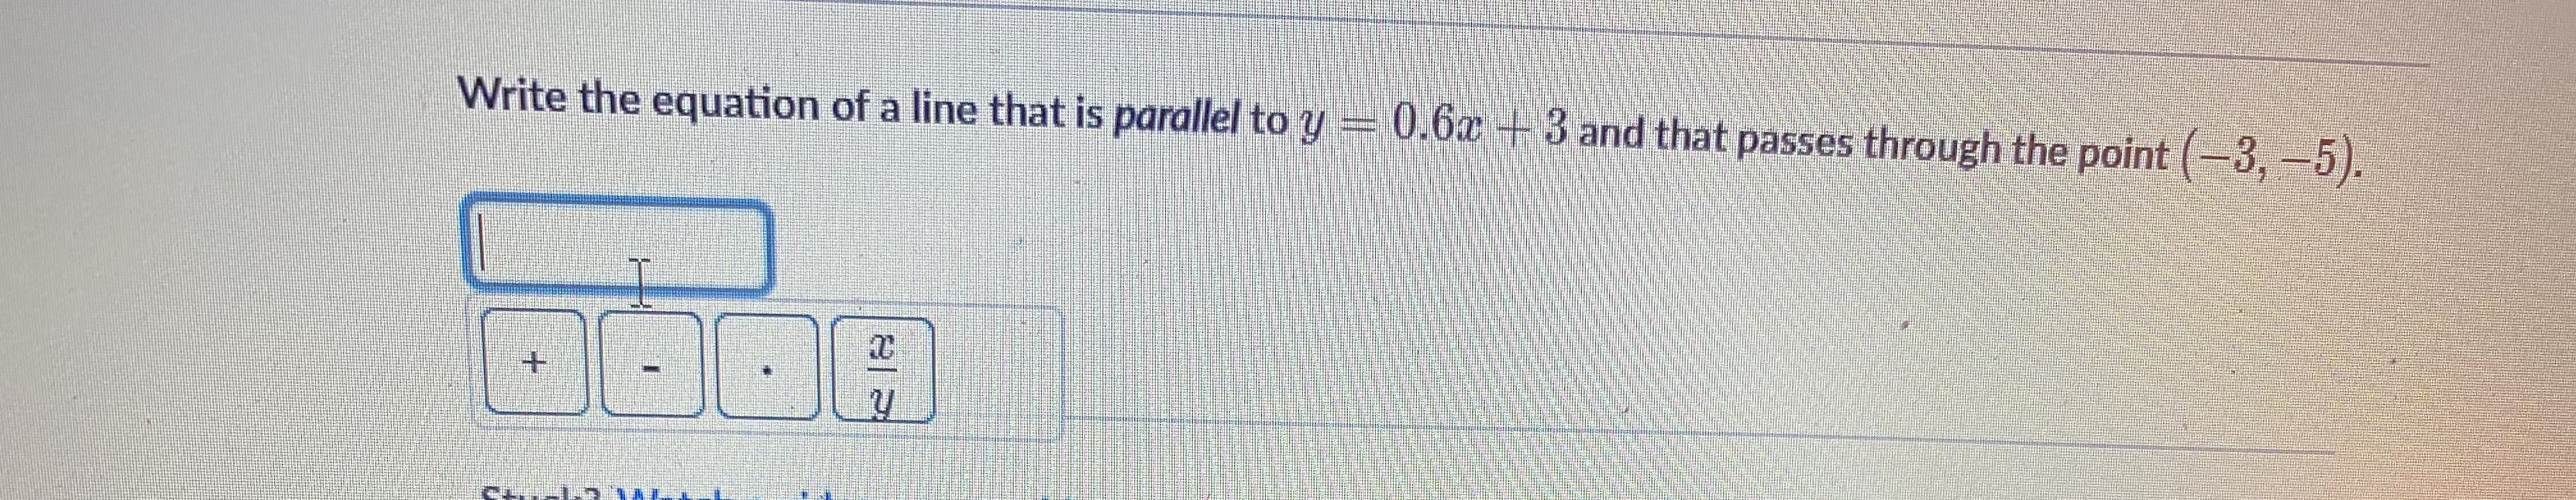 Write the equation of a line that is parallel to y = 0.6x +3 and that passes through the point (-3,-5).
